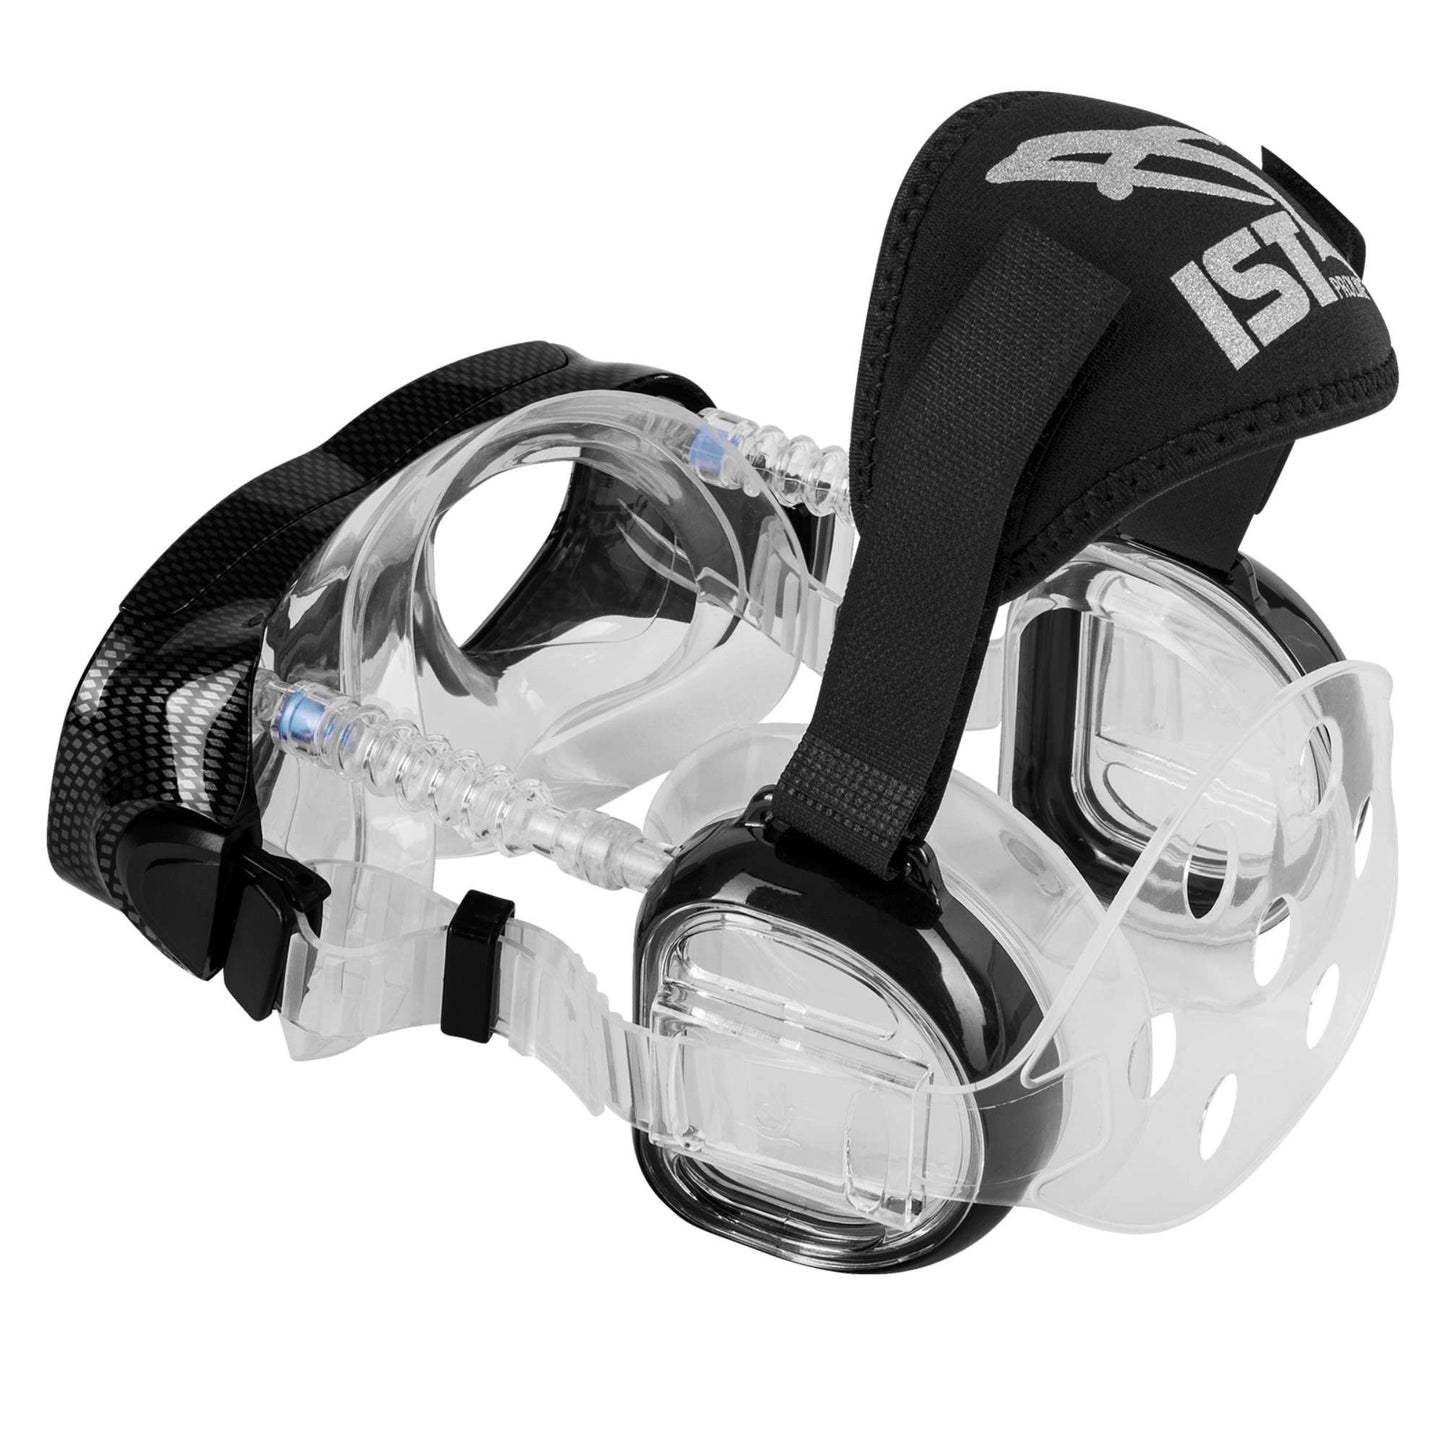 IST Pro Ear Protector Mask